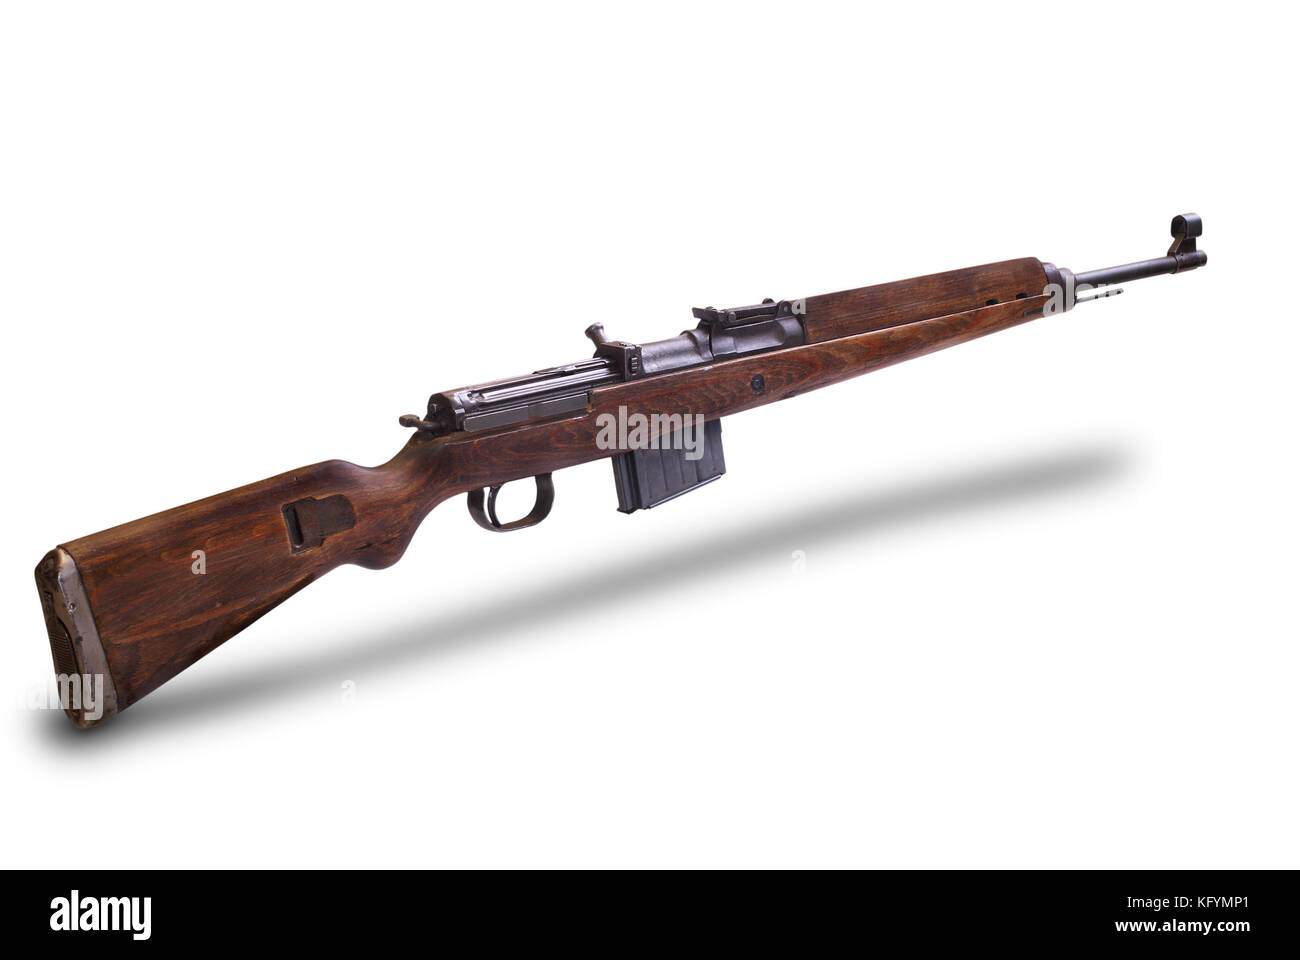 Germany at the WW2. German semi-automatic rifle - Gewehr 43 or Karabiner 43 (Gew 43, Kar 43) is a 7.92x57mm Mauser caliber rifle developed by Nazi Ger Stock Photo